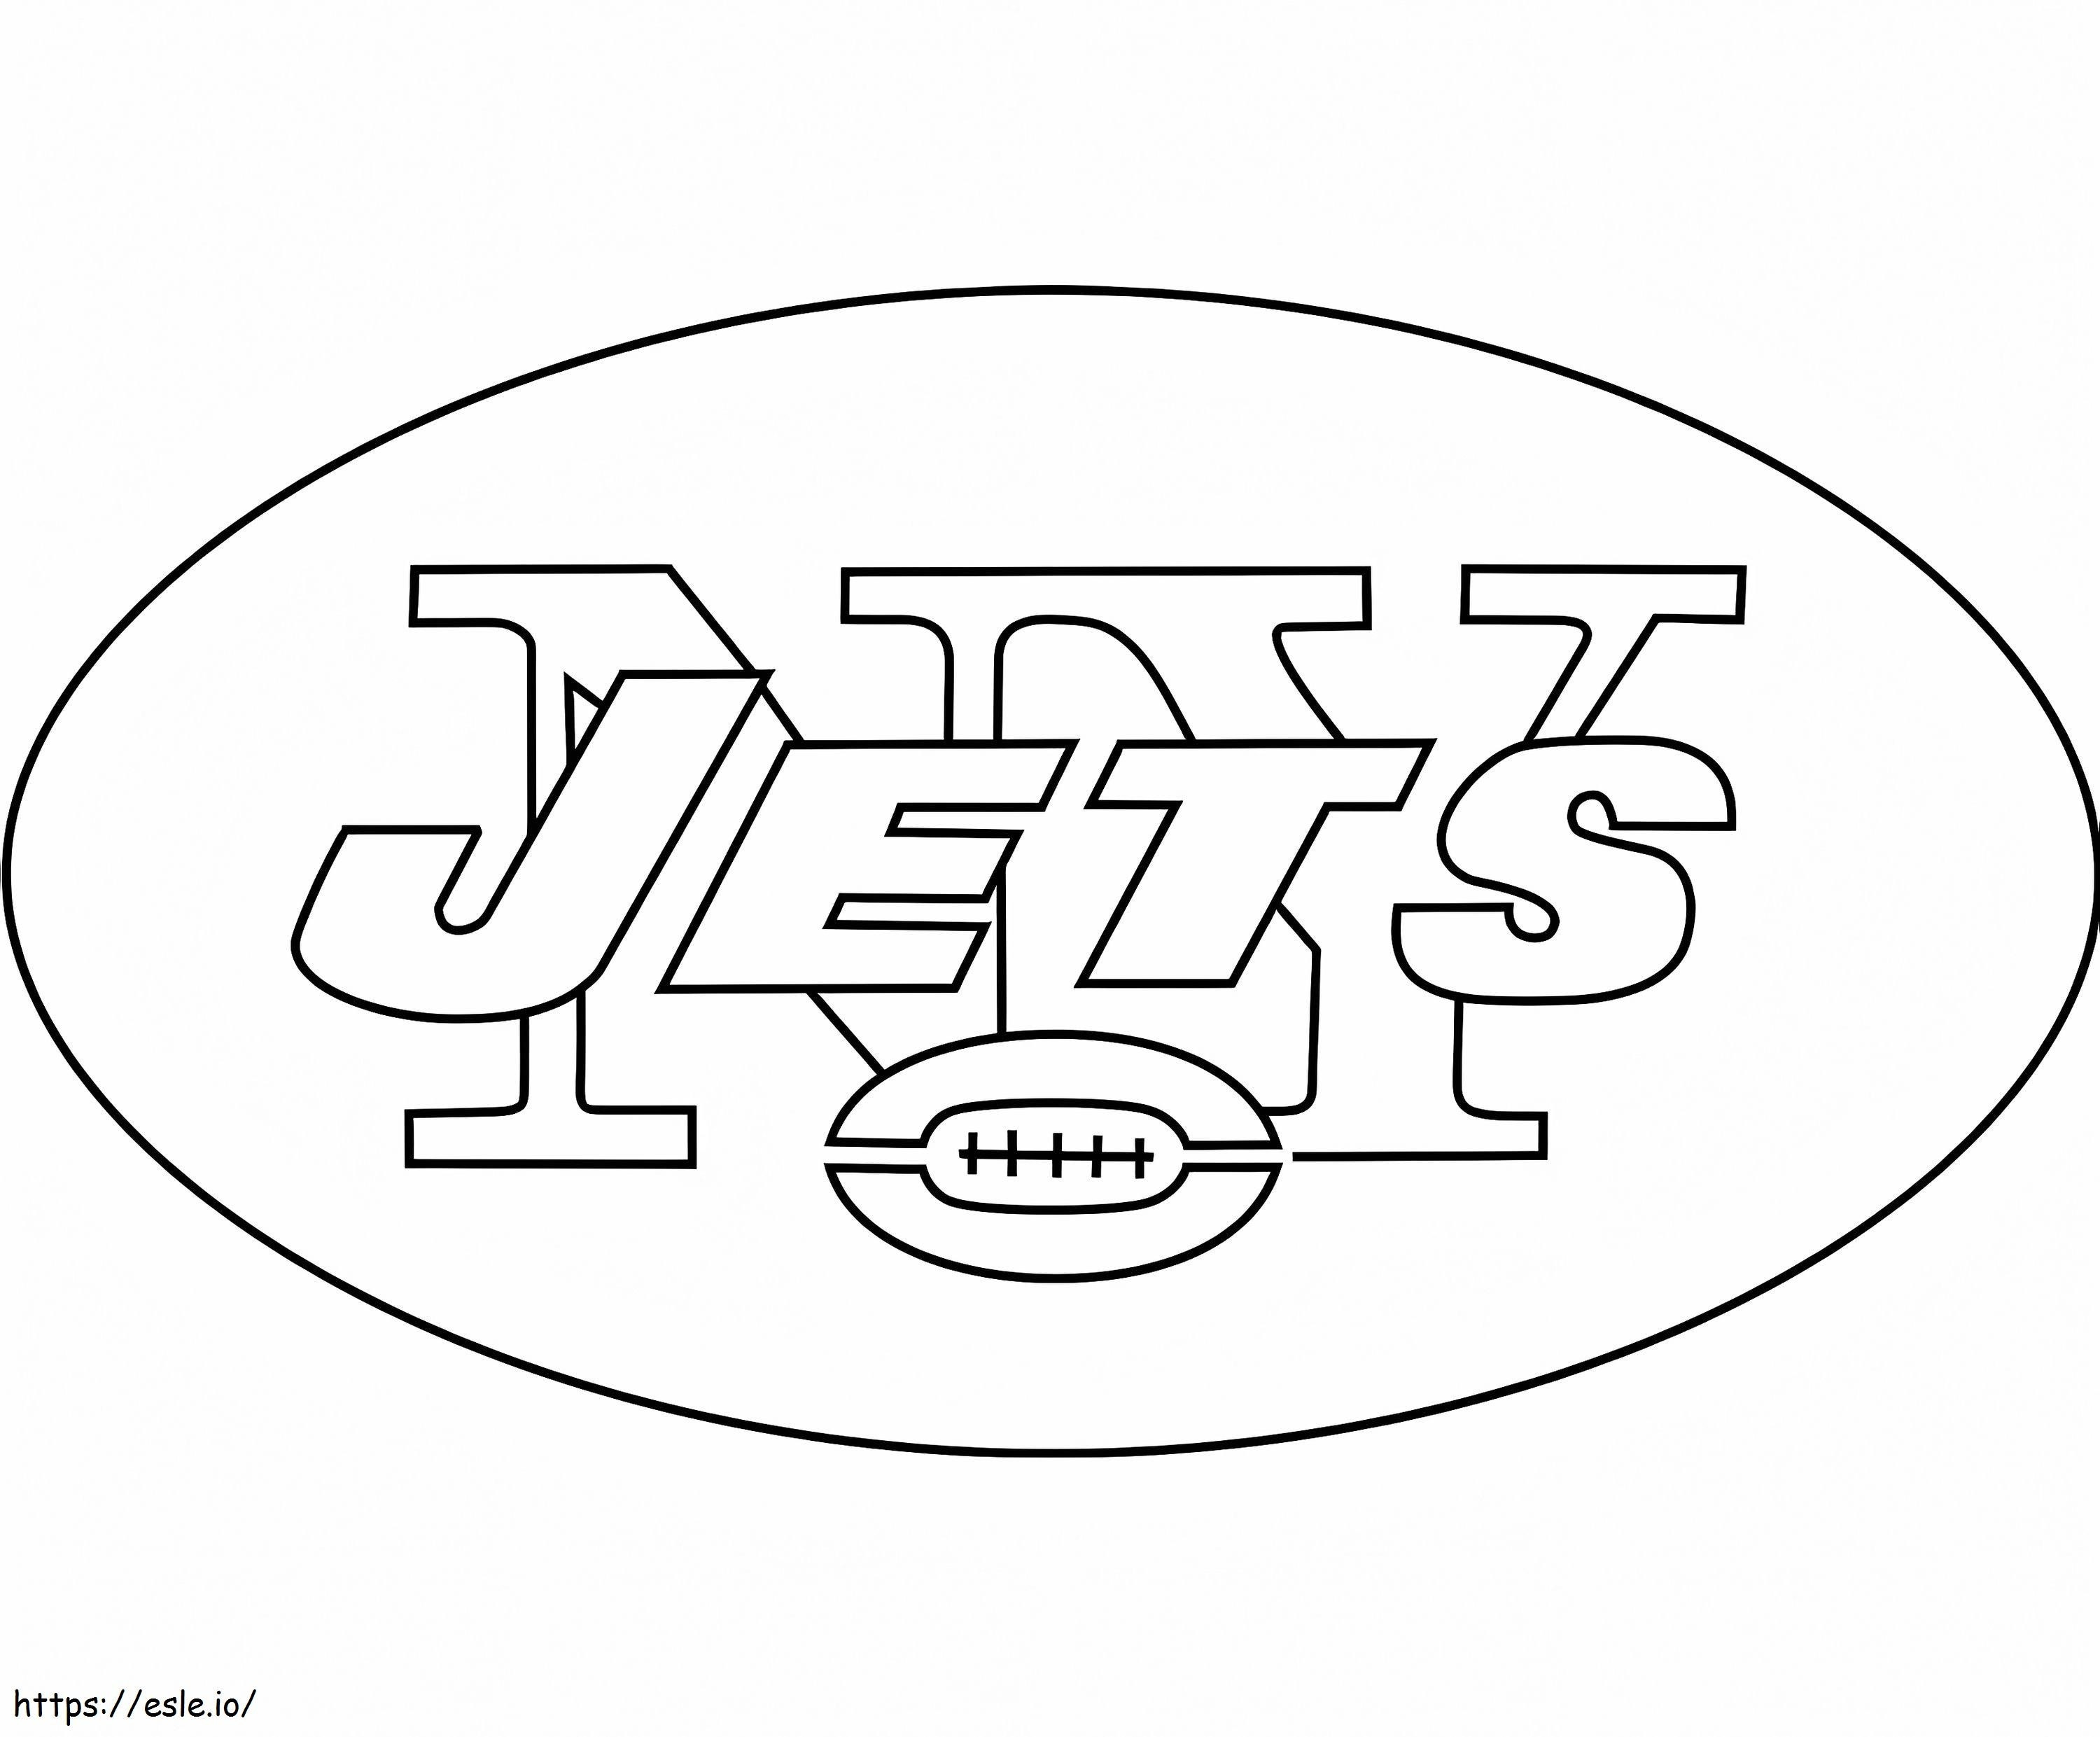 New York Jets Logo coloring page